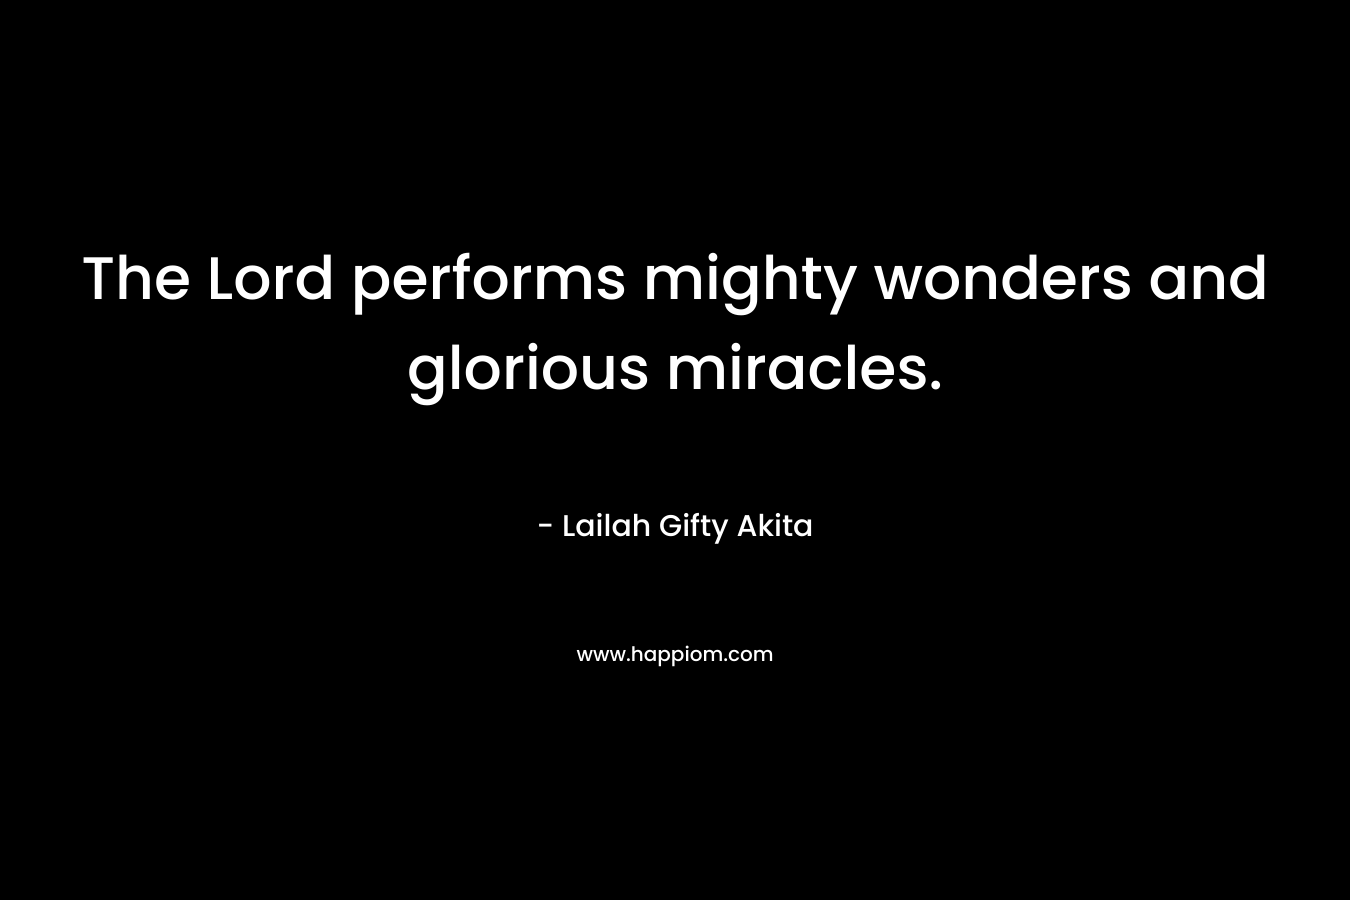 The Lord performs mighty wonders and glorious miracles.